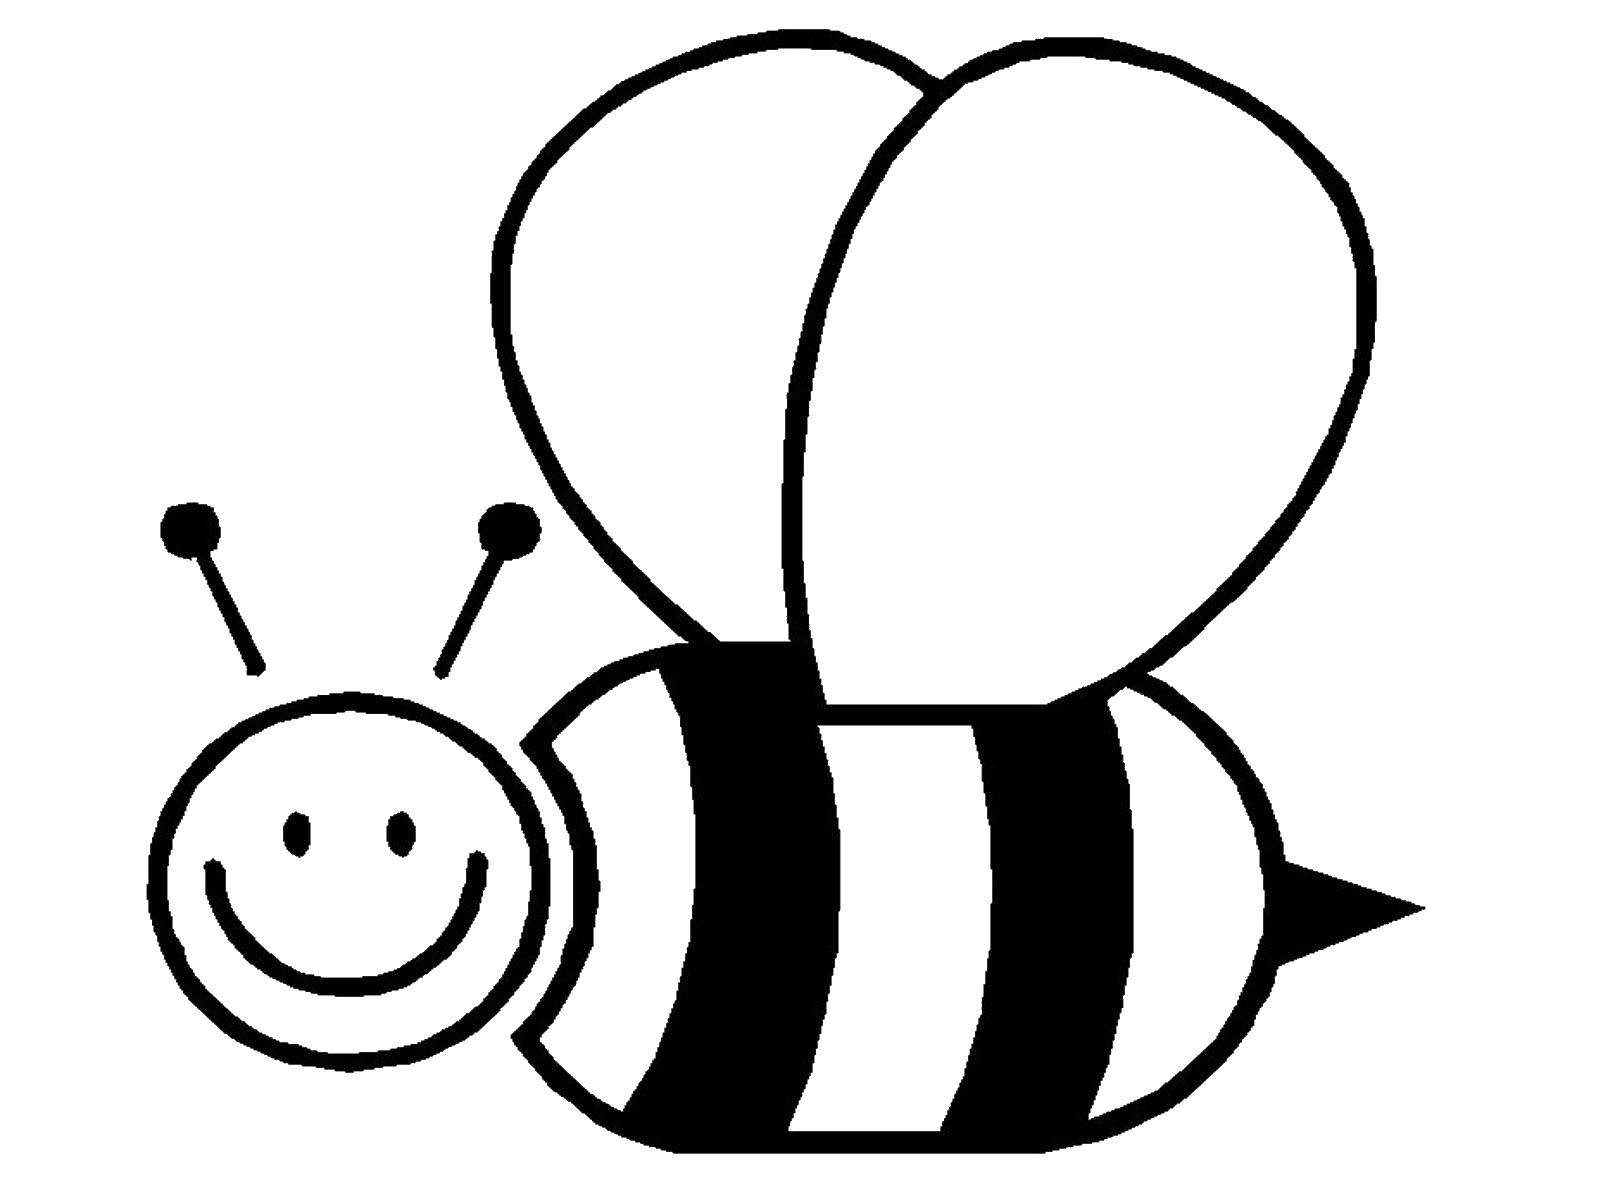 Coloring Bee. Category coloring. Tags:  bee.